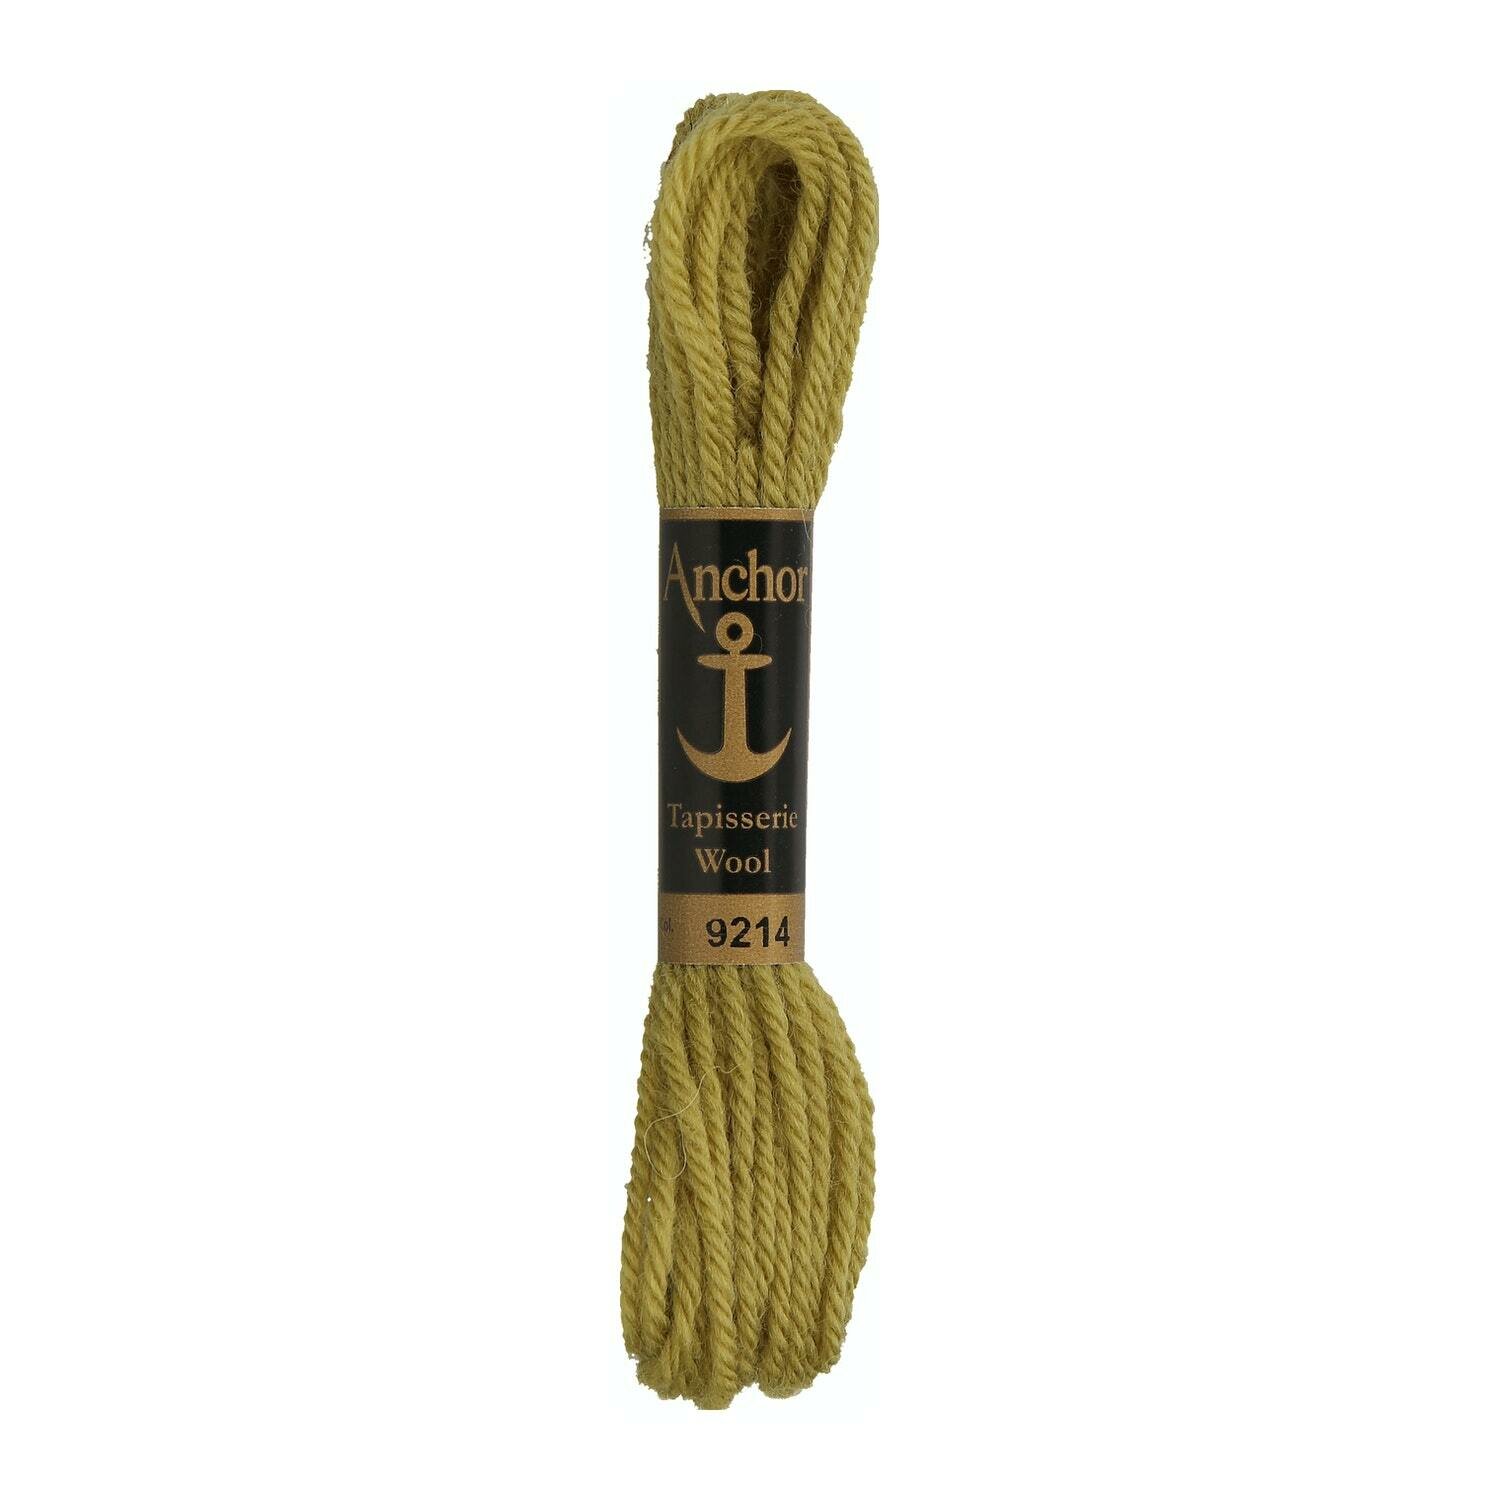 Anchor Tapisserie Wool #  09214